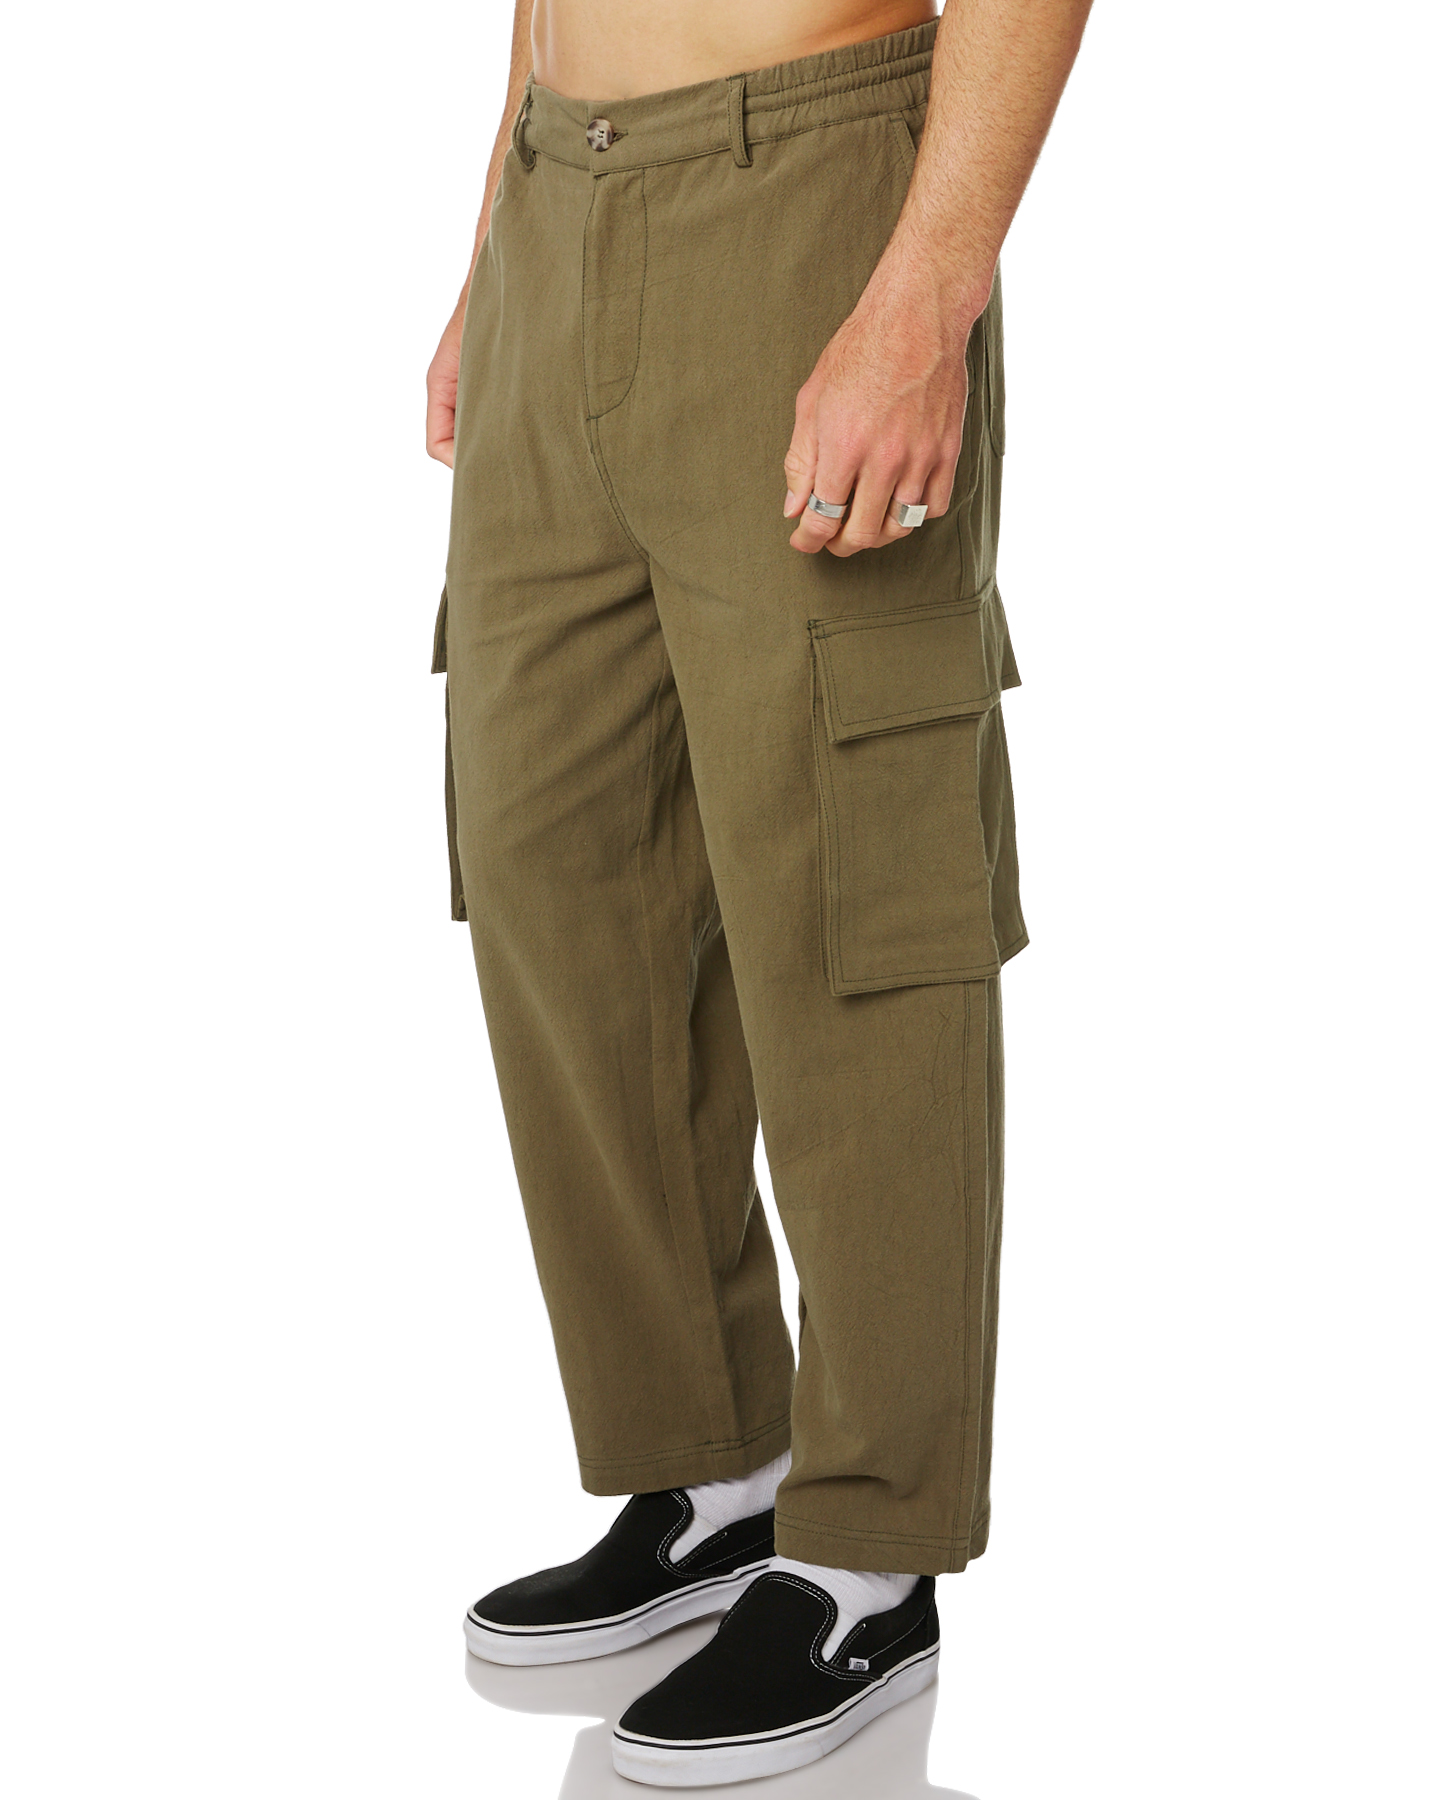 Misfit Barrage Mens Cargo Pant - Army | SurfStitch